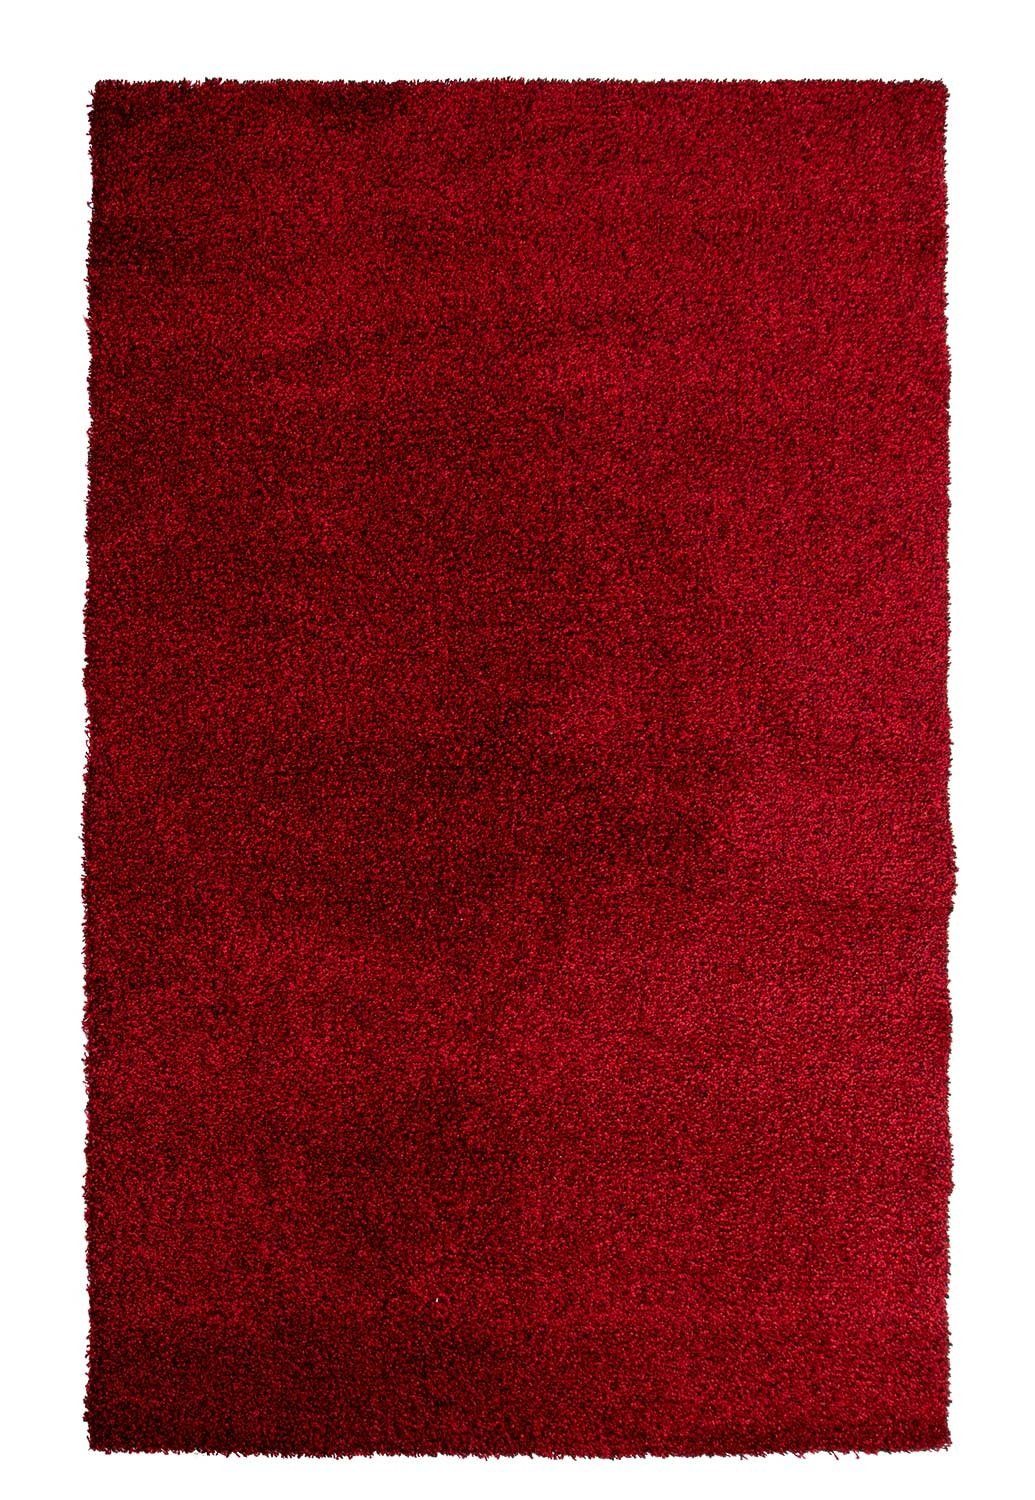 Teppich DELIGHT COSY, Polyester, Rot, 160 x 230 cm, Balta Rugs, rechteckig, Höhe: 22 mm